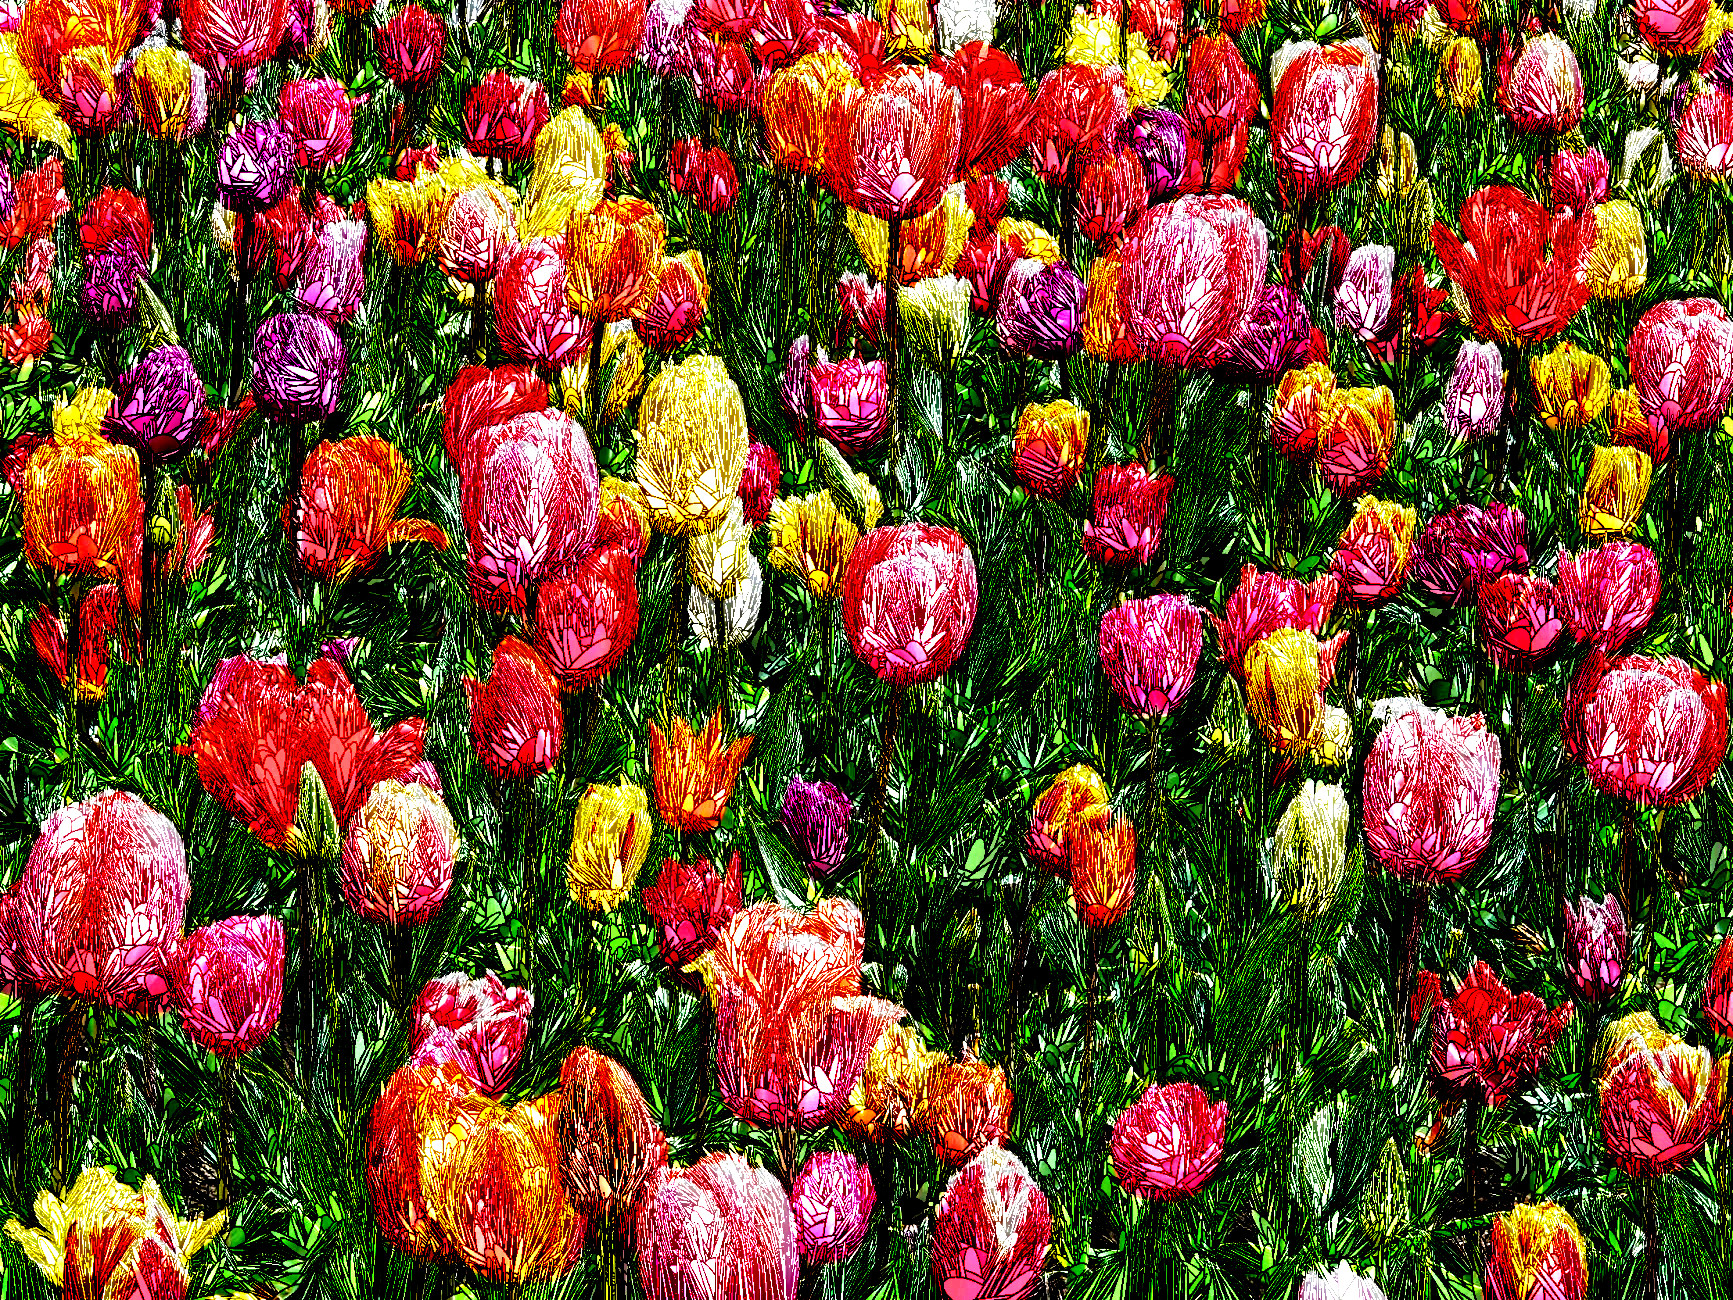 2020-03-03 07-56-19tulips-bed-colorful-color-69776 with a tensor structure effect.jpg